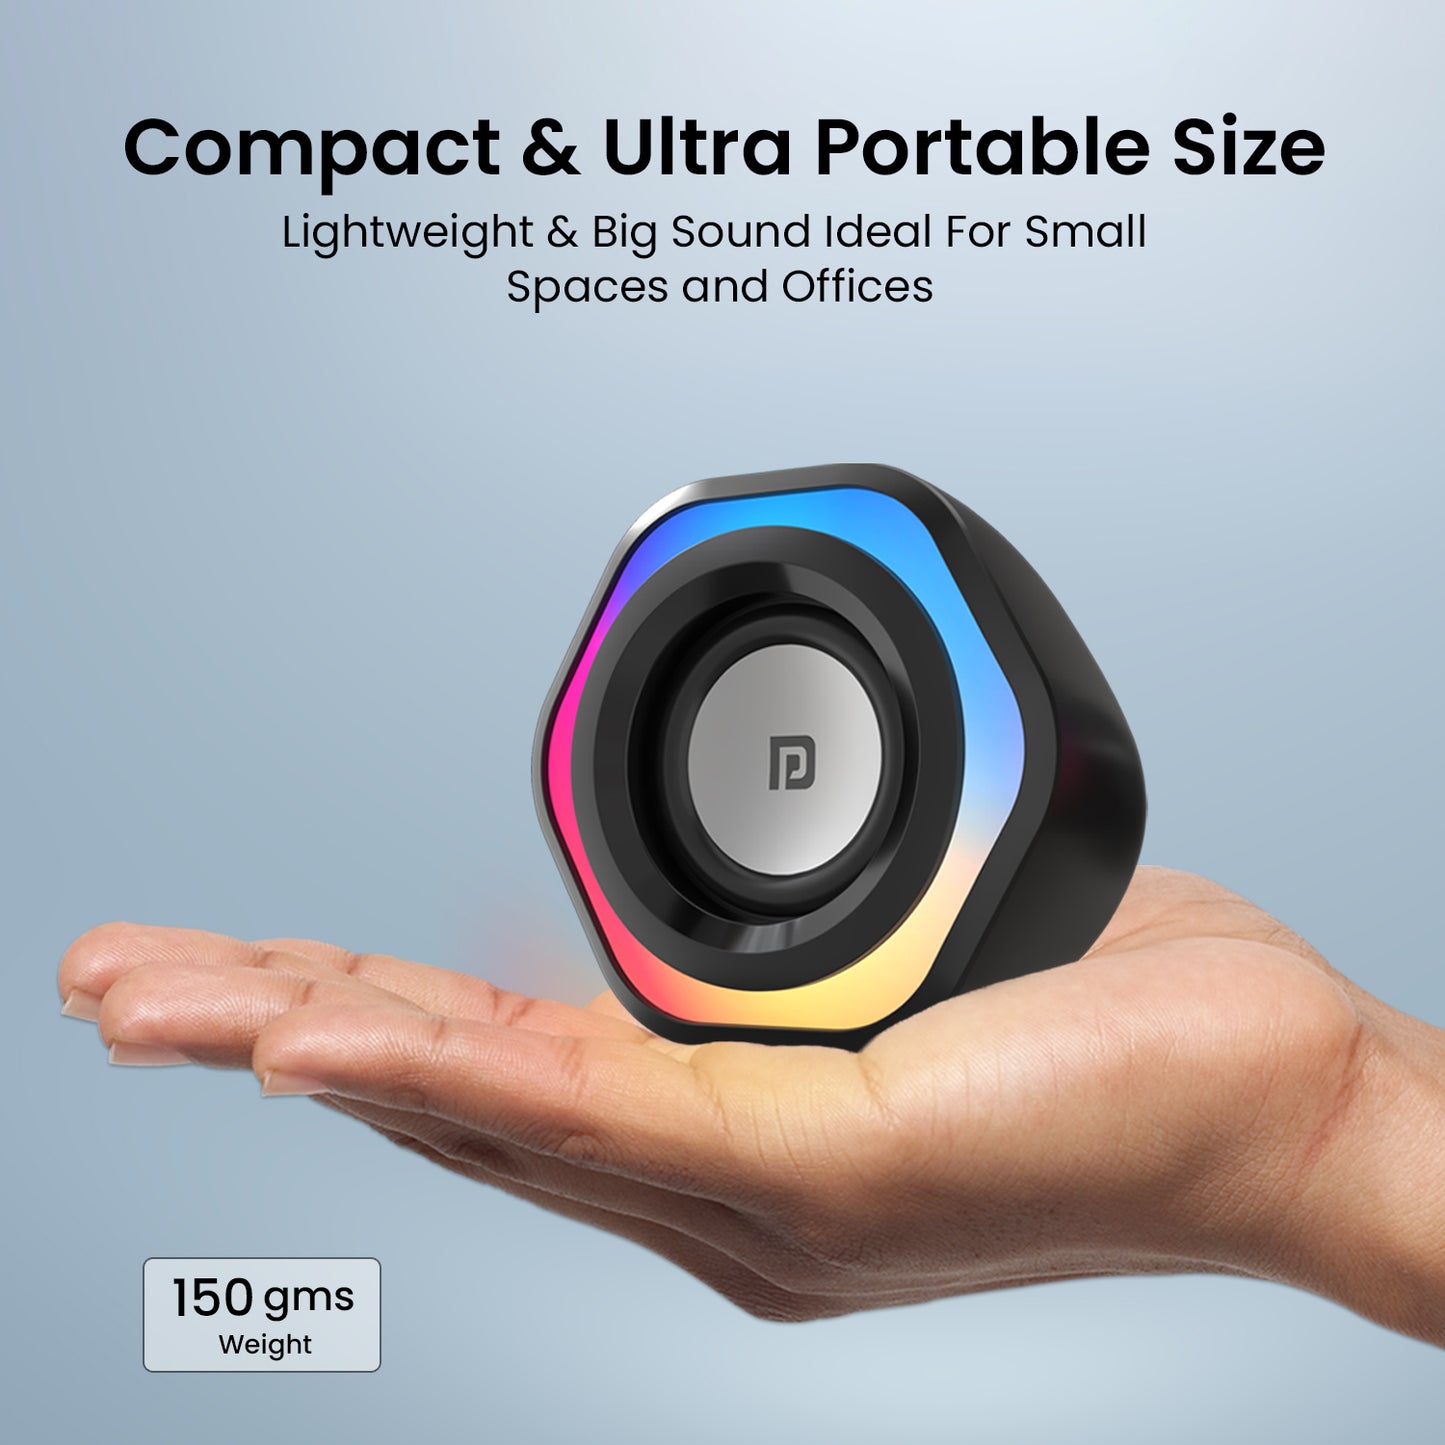 Black Portronics In Tune 4 6 watts usb speaker is compact and portable sizes